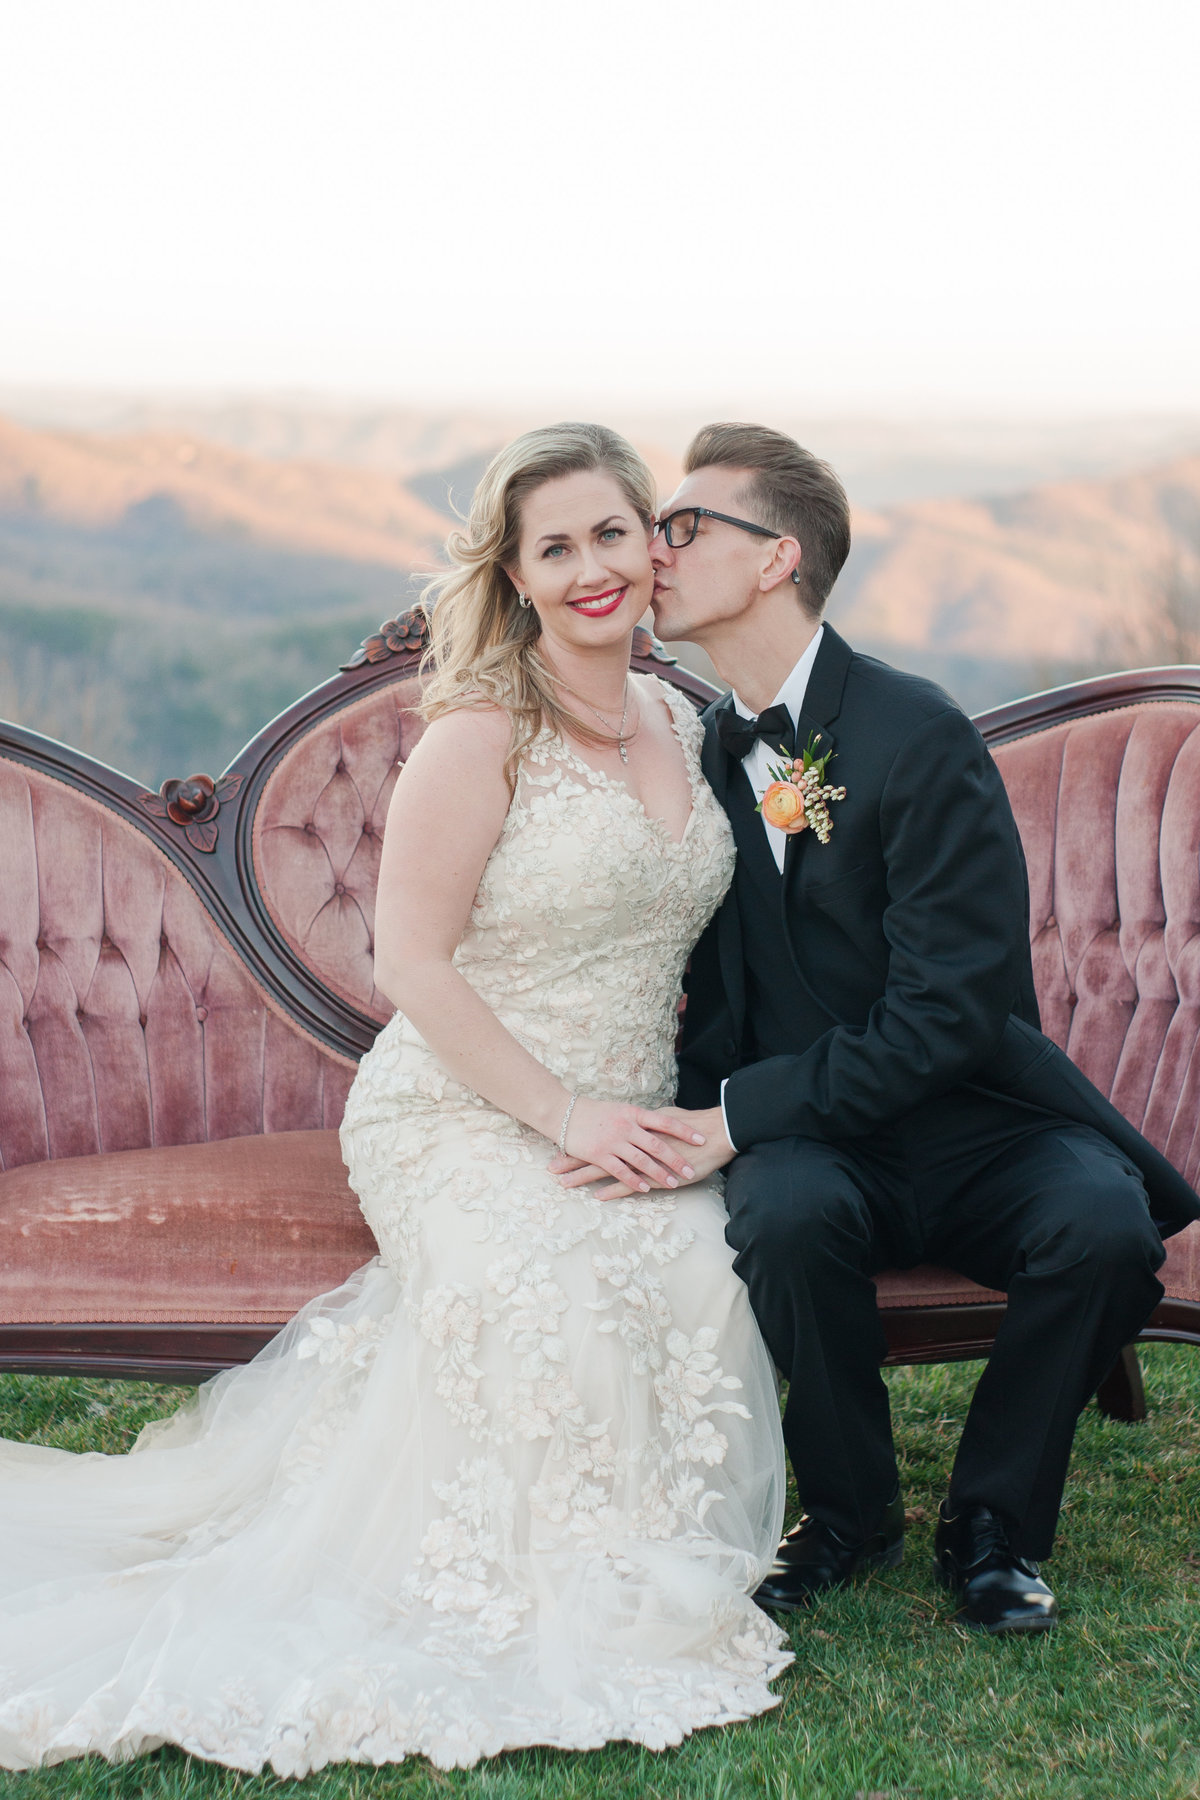 Glamourous wedding inspiration photographed at Westglow Mansion by Boone Wedding Photographer Wayfaring Wanderer. Westglow Mansion is a beautiful venue in Blowing Rock, NC.